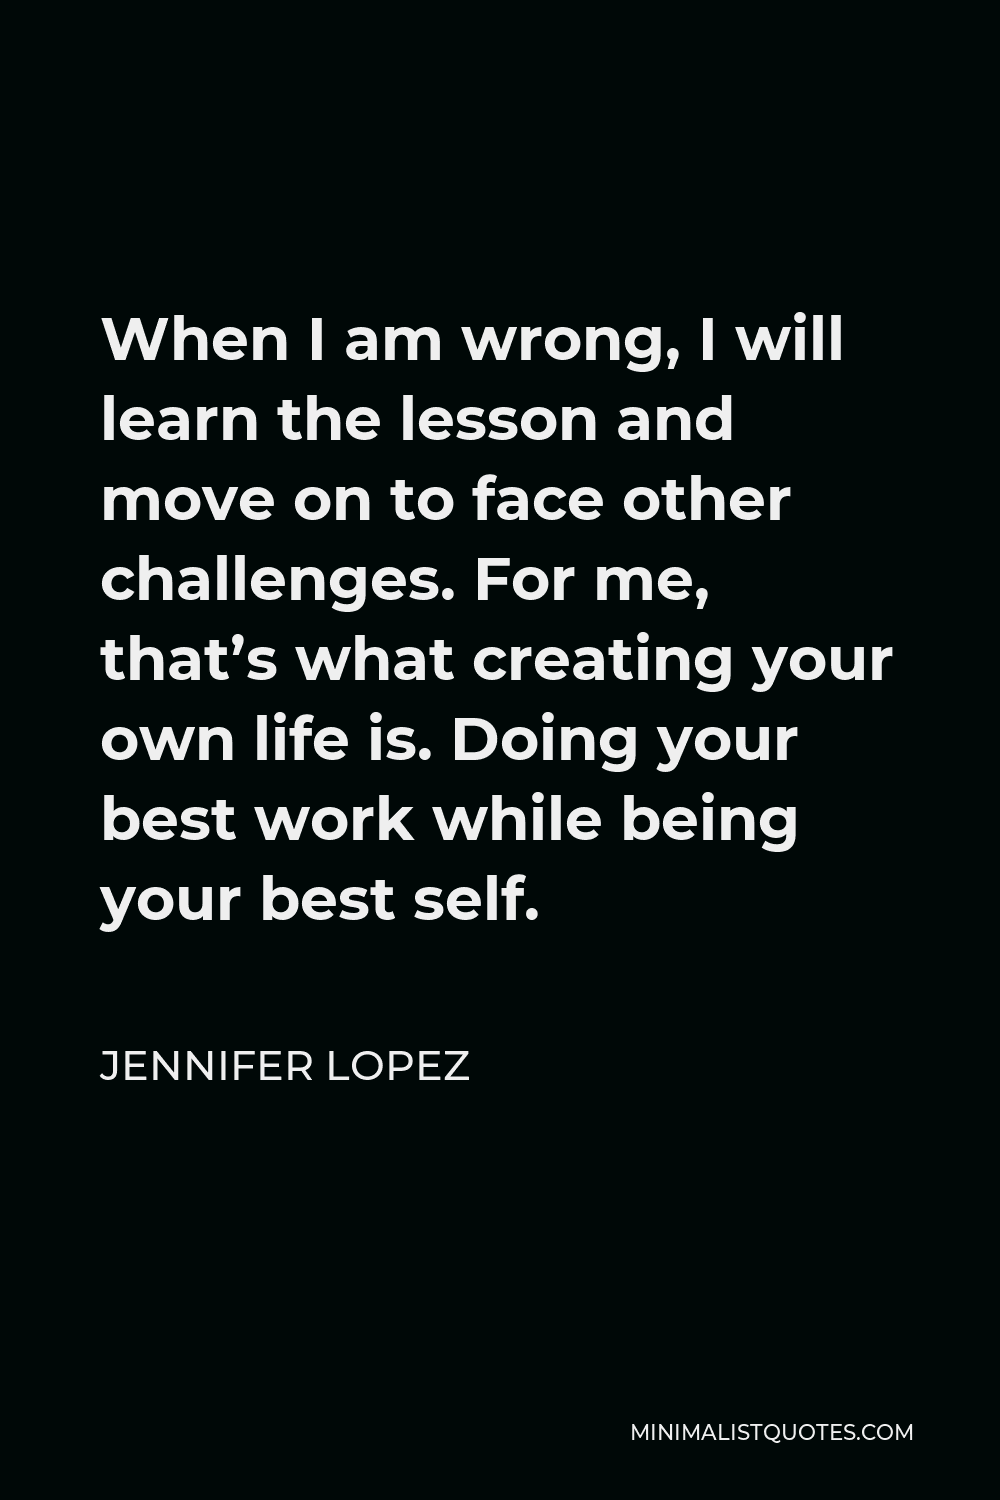 Jennifer Lopez Quote - When I am wrong, I will learn the lesson and move on to face other challenges. For me, that’s what creating your own life is. Doing your best work while being your best self.